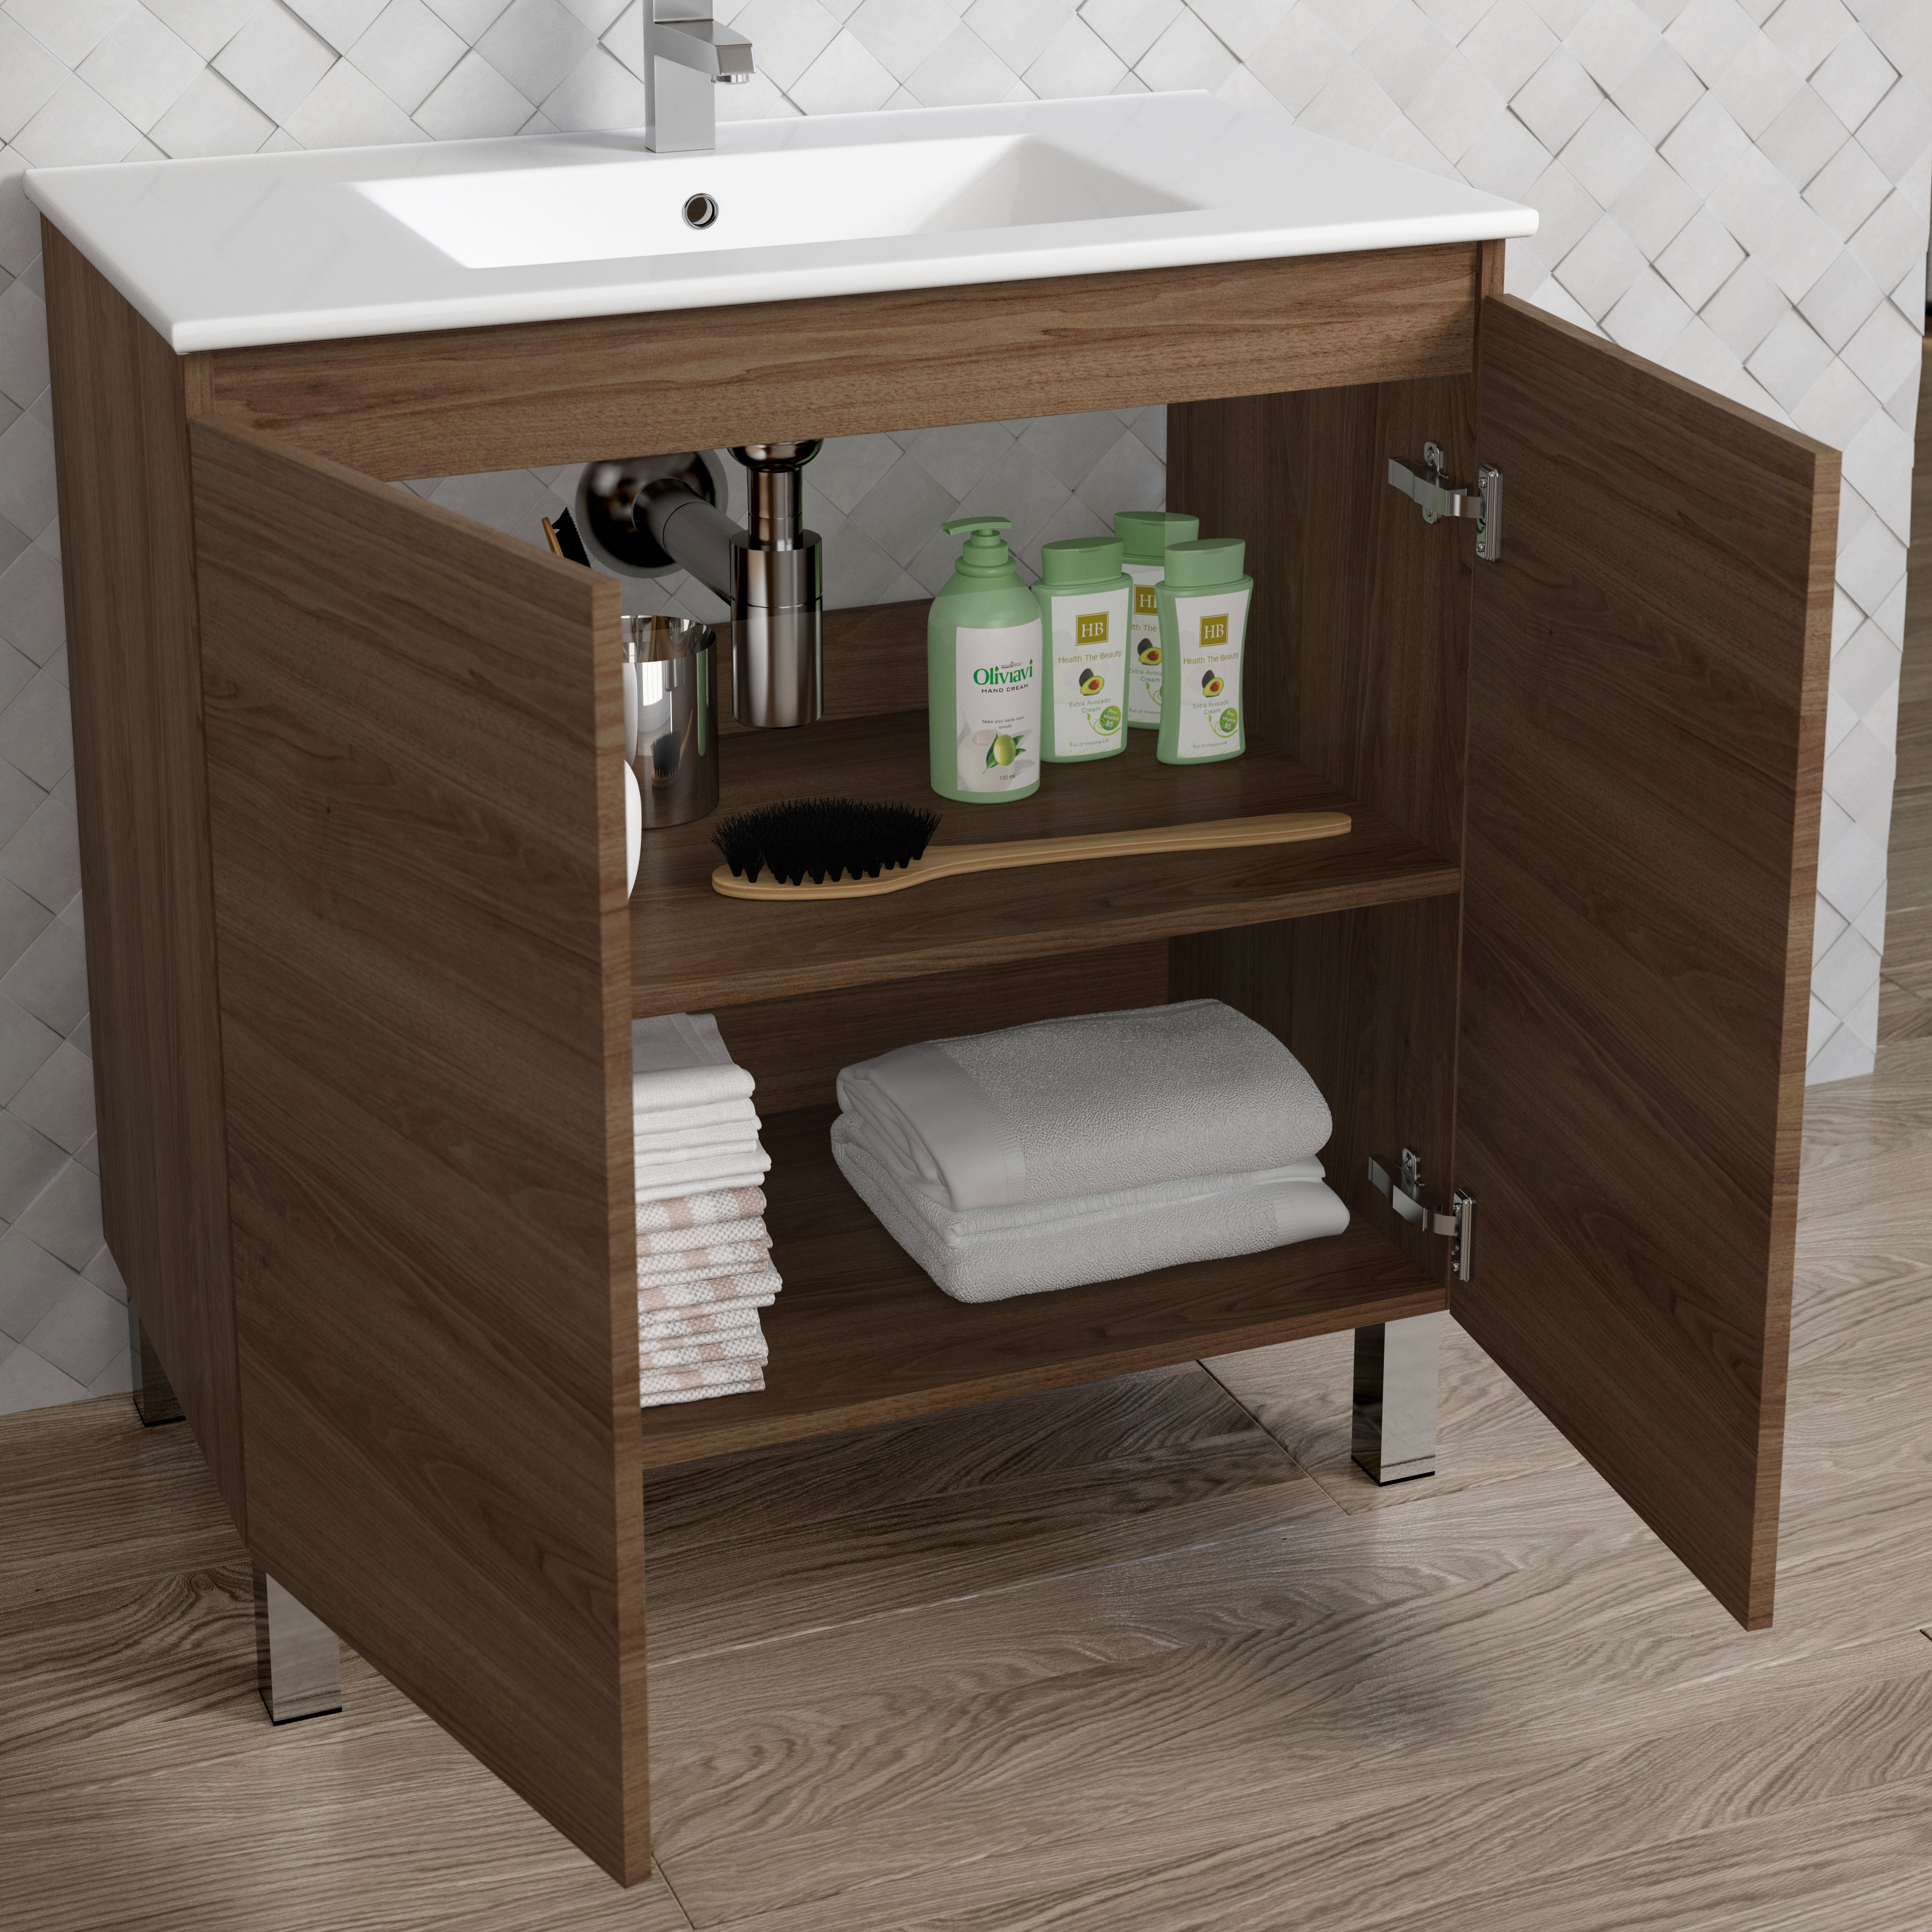 DAX Sunset Vanity Cabinet with Onix basin